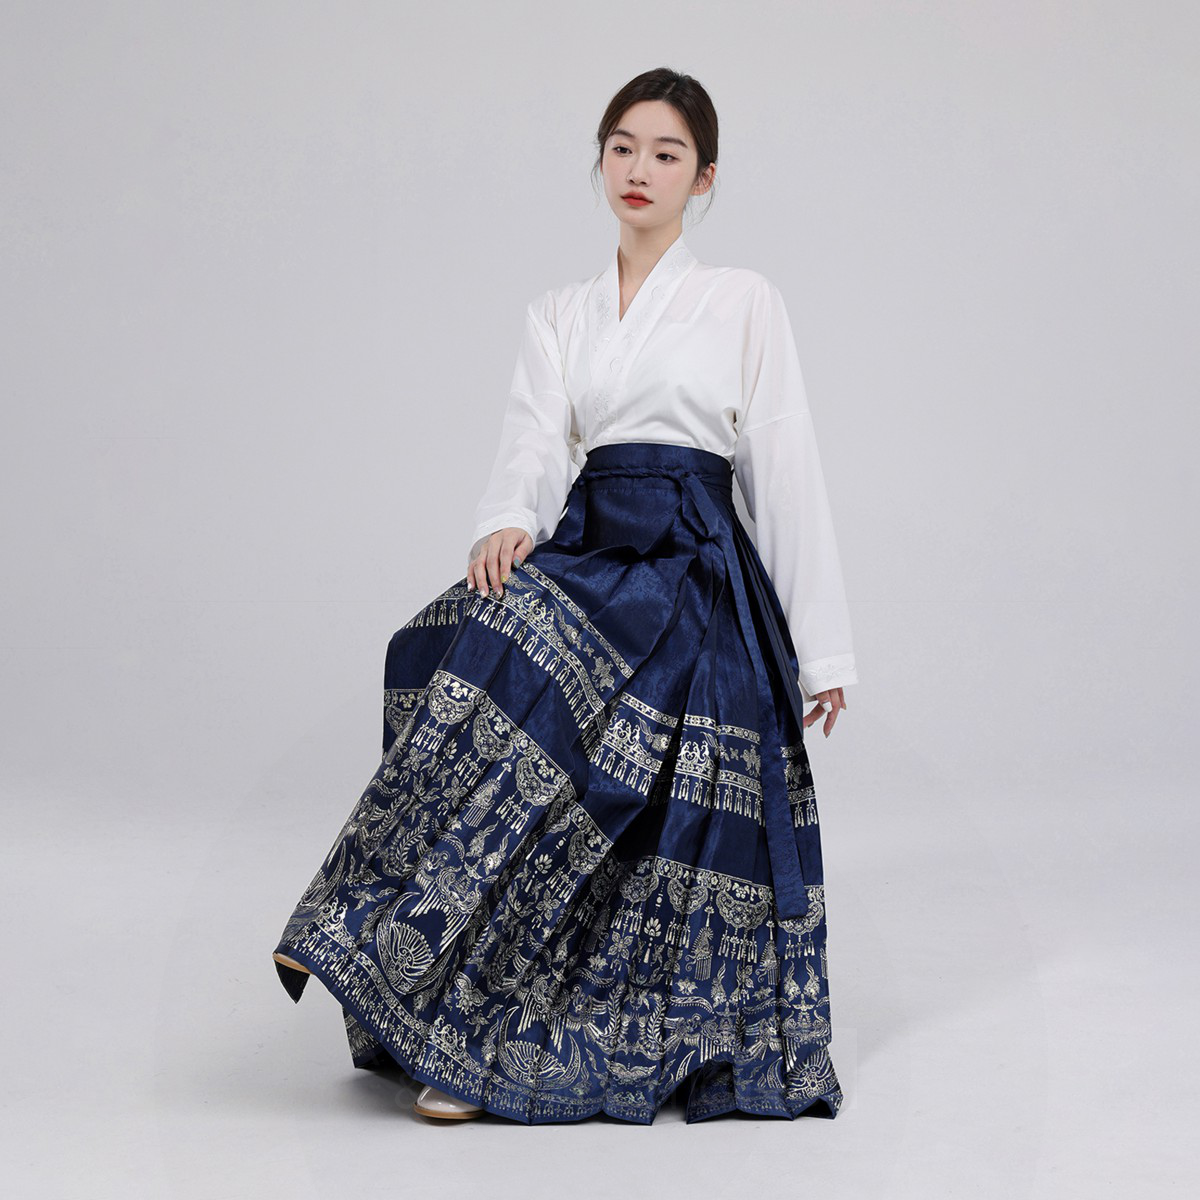 Hmong Silver Heritage Skirt by Zehui Ni Silver Costume and Heritage Wear Design Award Winner 2024 